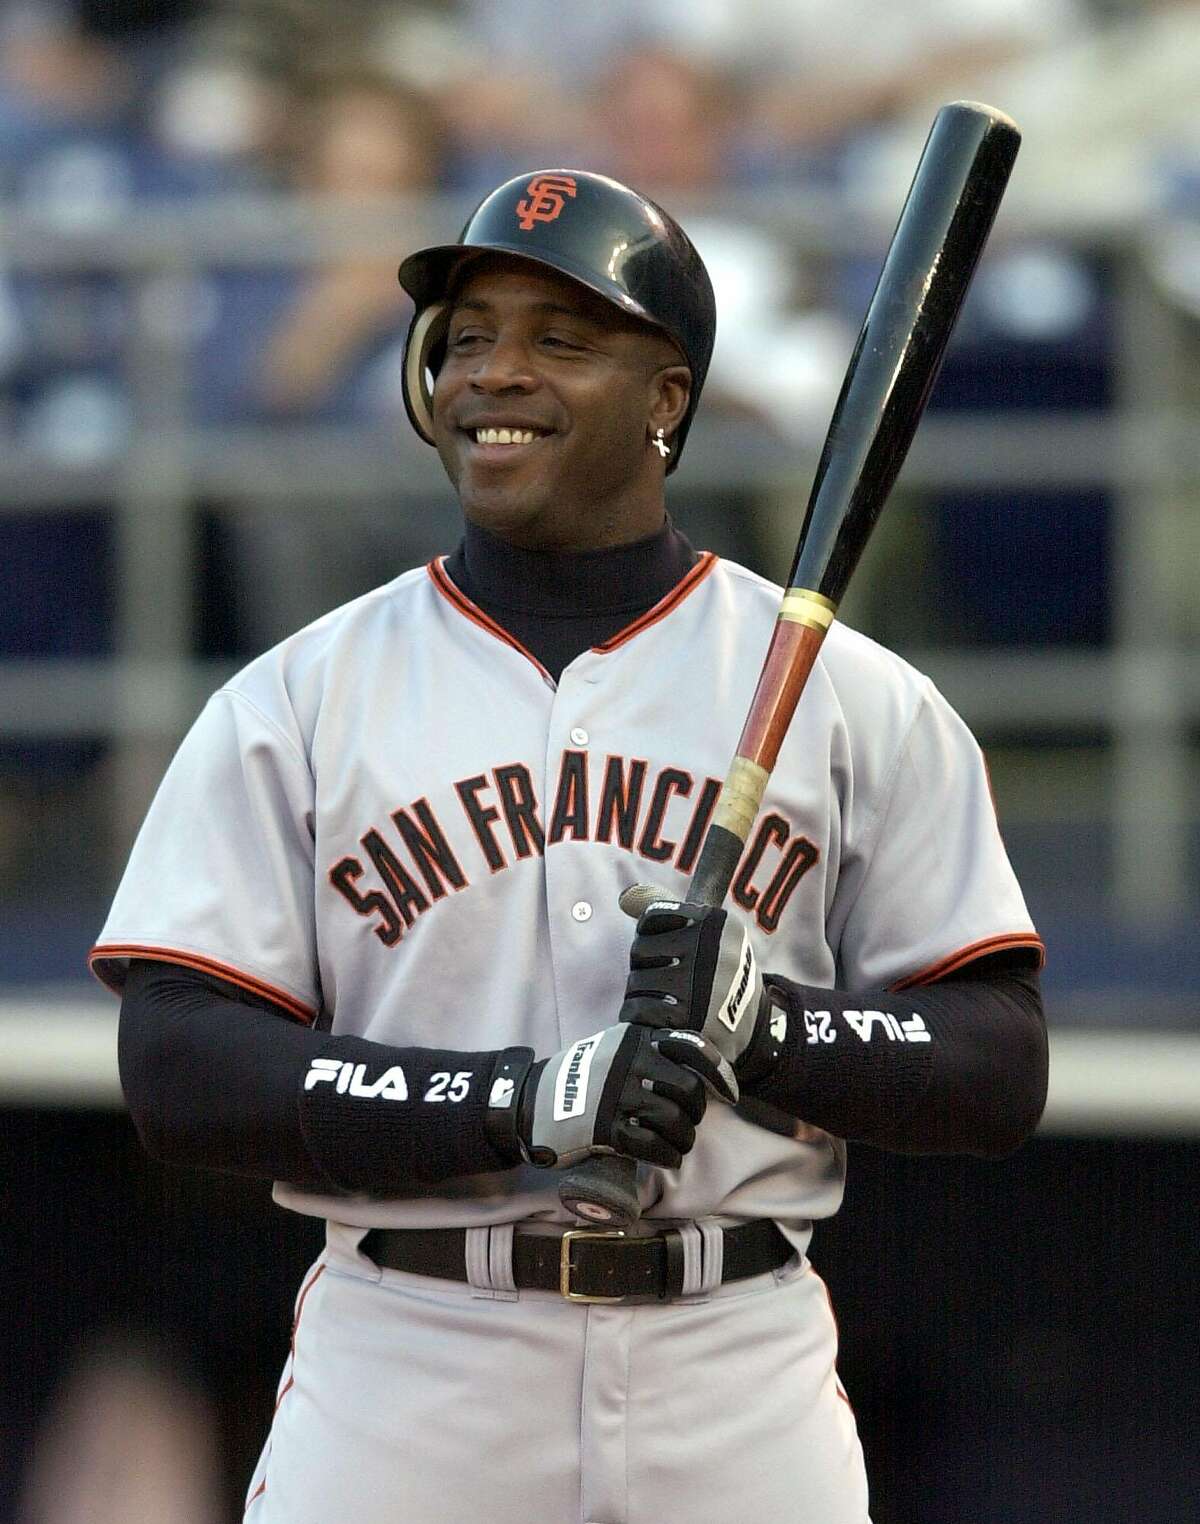 ** ADVANCE FOR WEEKEND EDITIONS, JUNE 15-16 -- FILE -- ** San Francisco Giants' Barry Bonds sports a big grin as he is intentionally walked in the first inning of the Giants game against the San Diego Padres in San Diego, in this June 3, 2002 photo. In 1998, Arizona manager Buck Showalter considered Bonds such a threat that he had him intentionally walked with the bases loaded. And that was years before Barry Bonds broke the single-season home run record.(AP Photo/Denis Poroy)